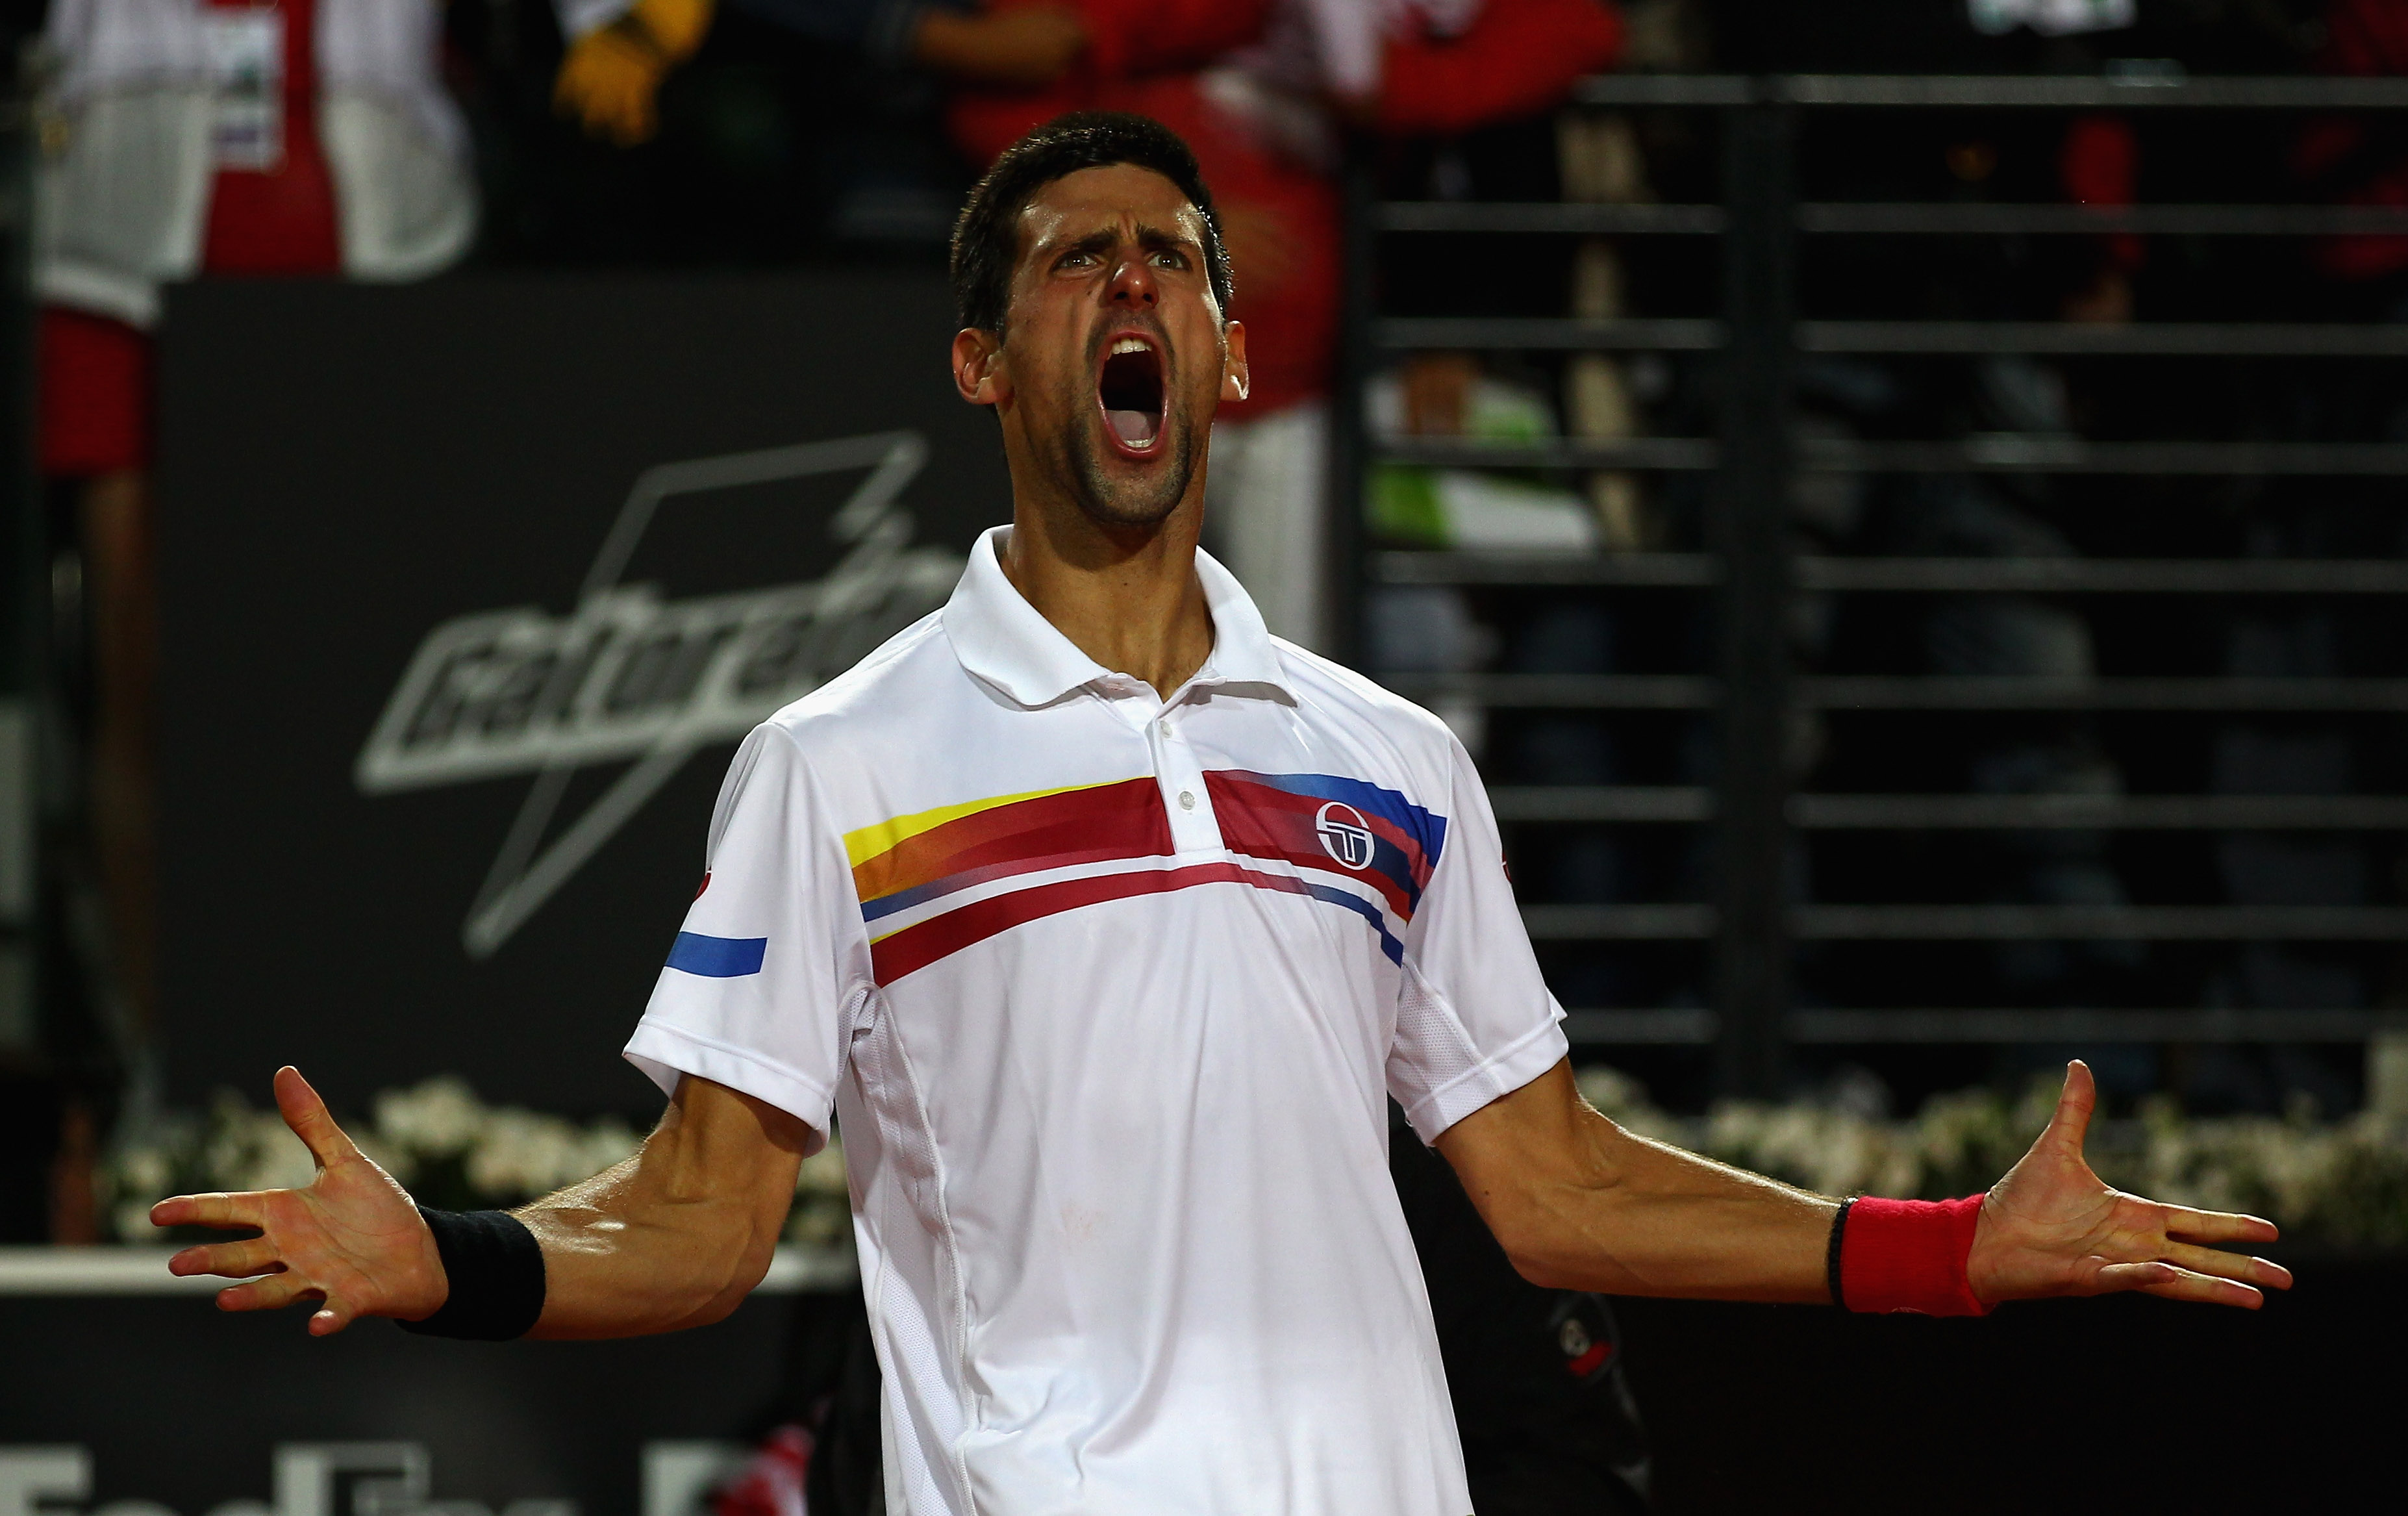 ROME, ITALY - MAY 15:  Novak Djokovic of Serbia celebrates after victory in the final against Rafael Nadal of Spain during day eight of the Internazoinali BNL D'Italia at the Foro Italico Tennis Centre on May 15, 2011 in Rome, Italy.  (Photo by Clive Brun